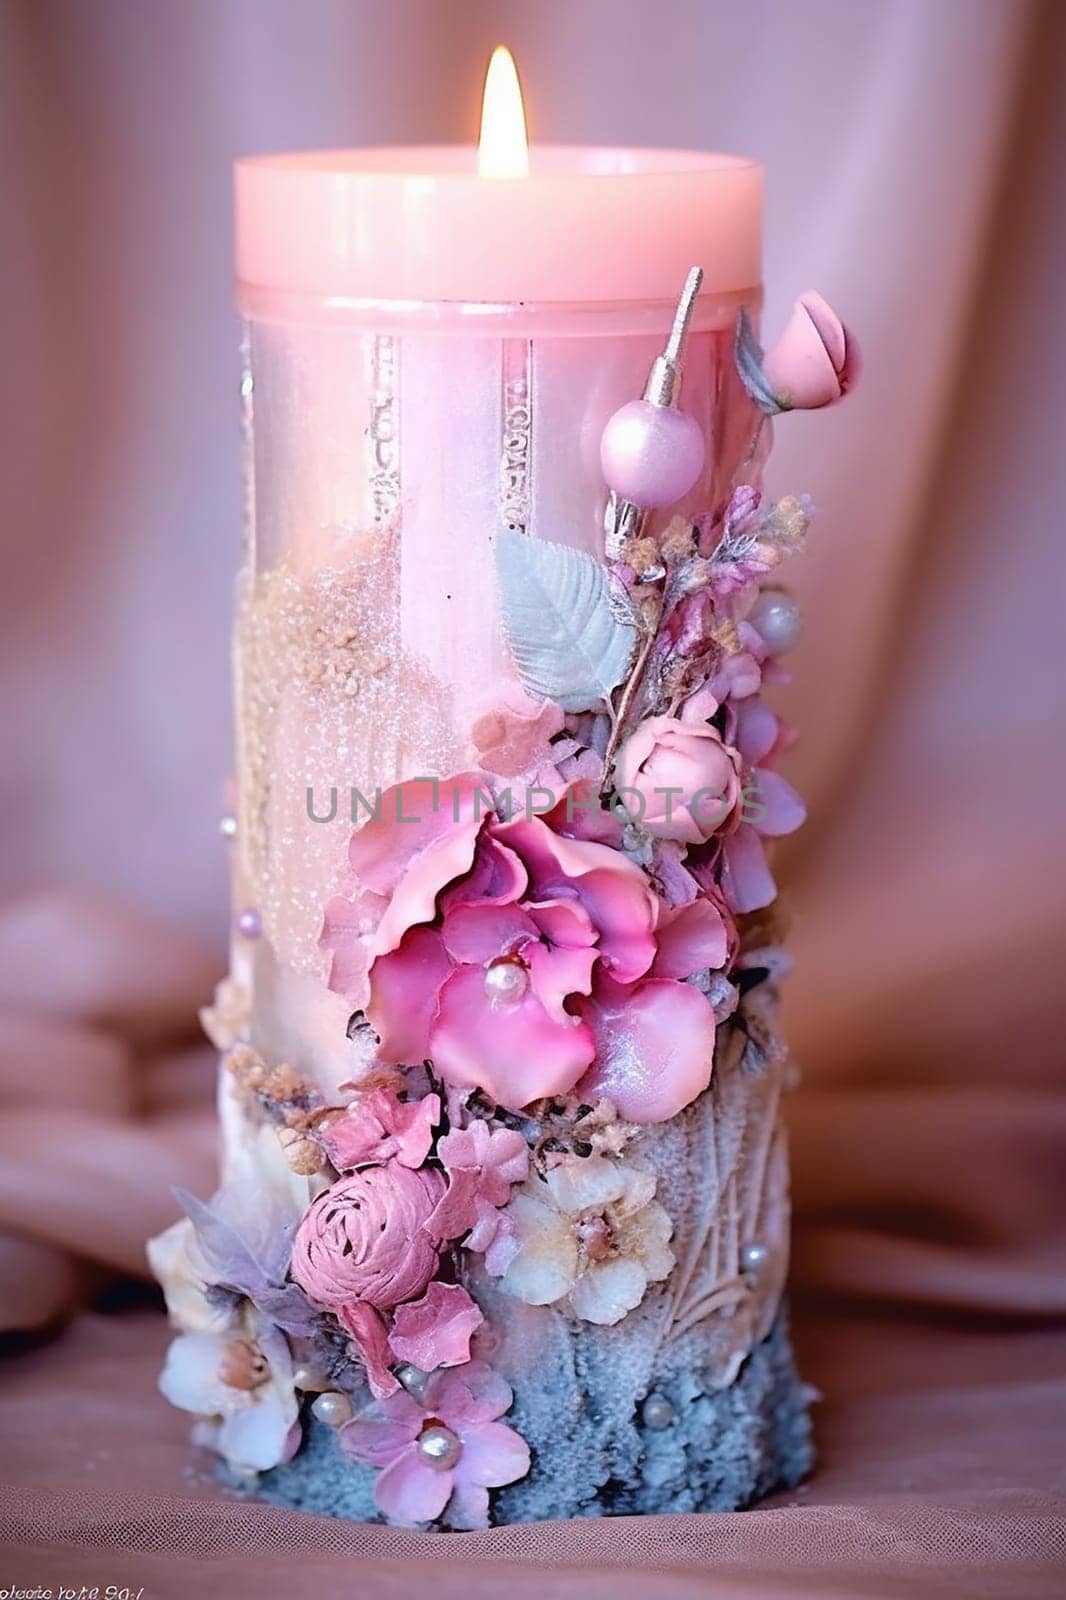 Decorative candle with pink flowers, beads, and rustic wood base.